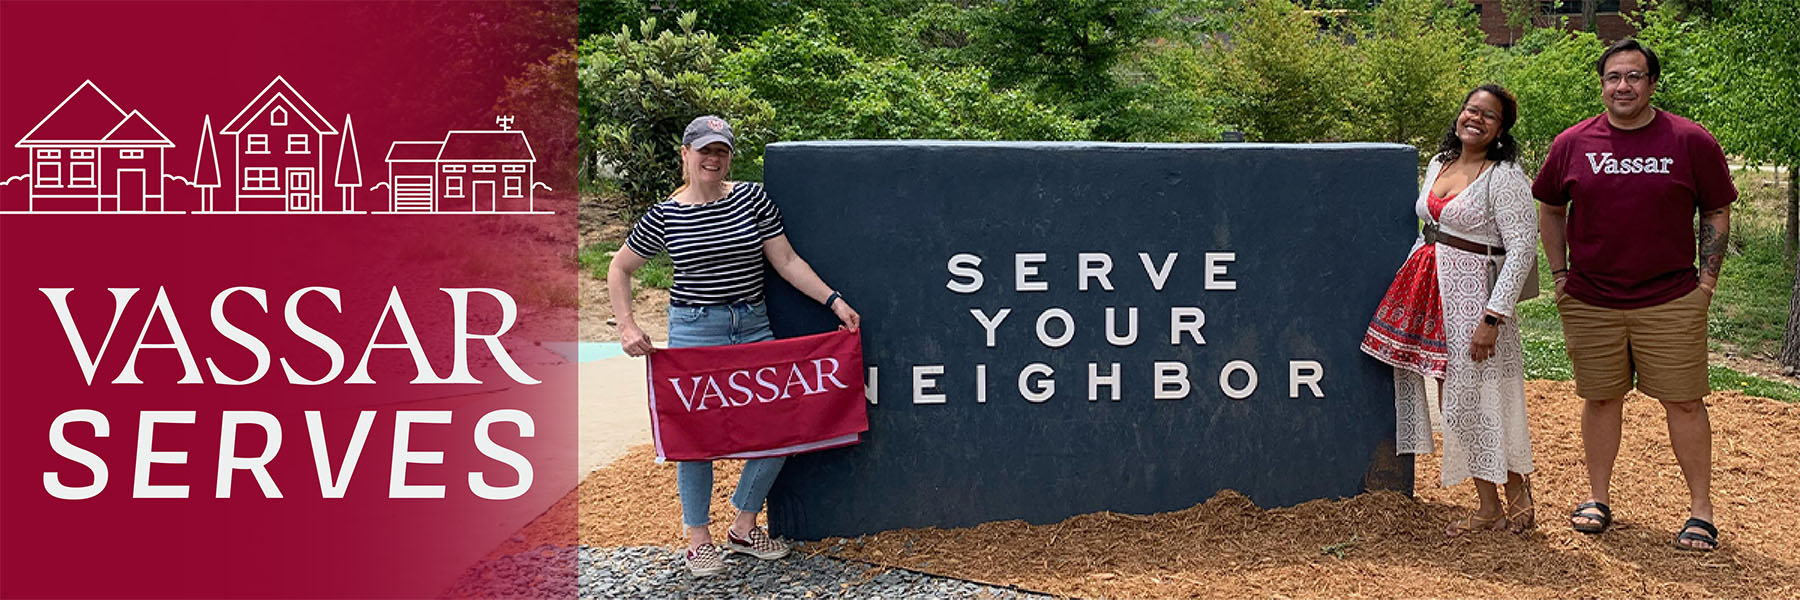 Line drawings of houses over text saying "Vassar Serves" next to a photo of three smiling people standing outside by a sign that says Serve Your Neighbor.